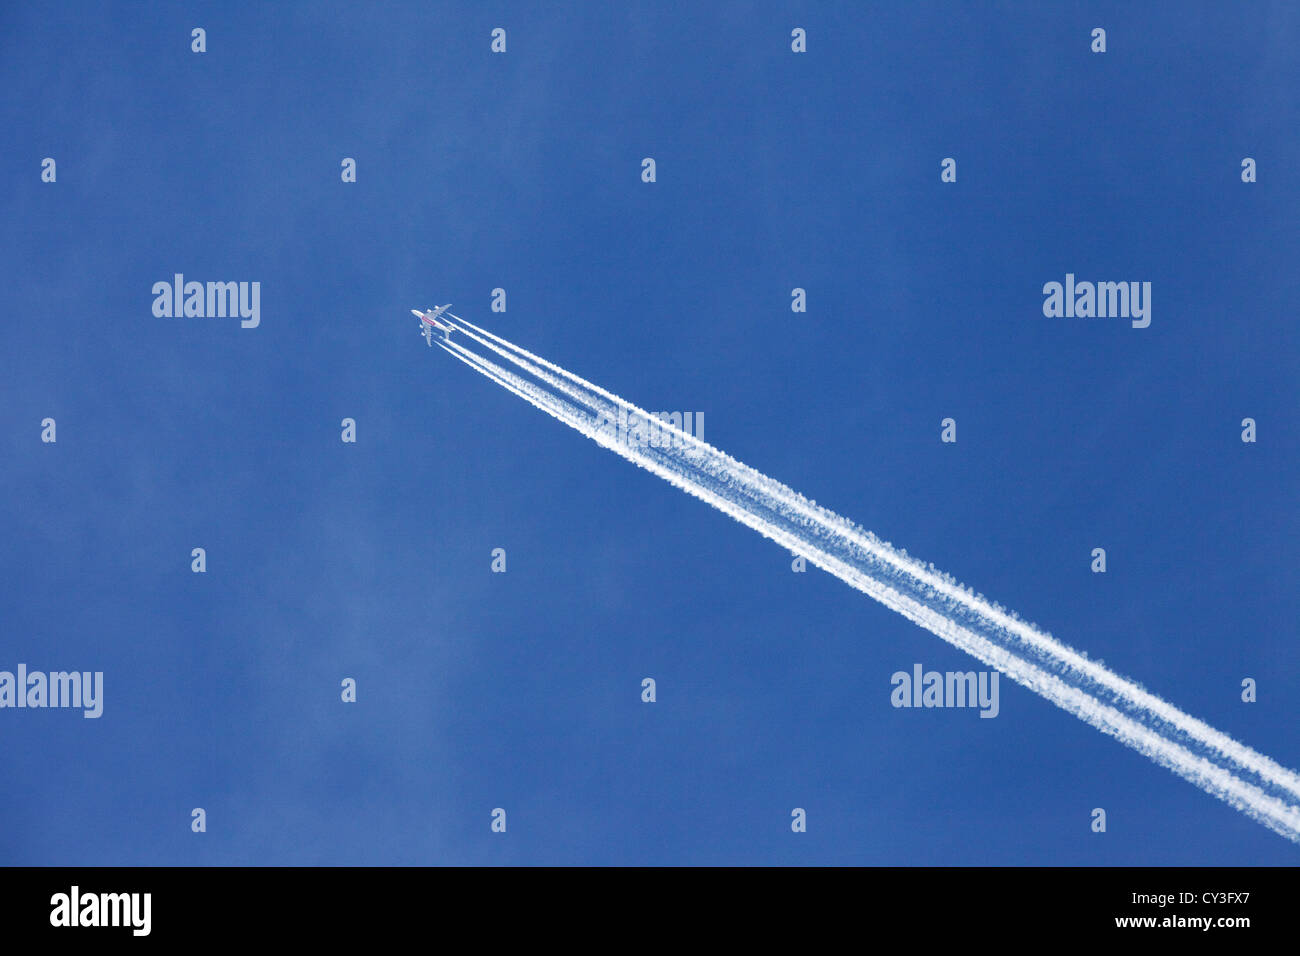 Airplane vapour trail from an Emirates plane against a blue sky Stock Photo